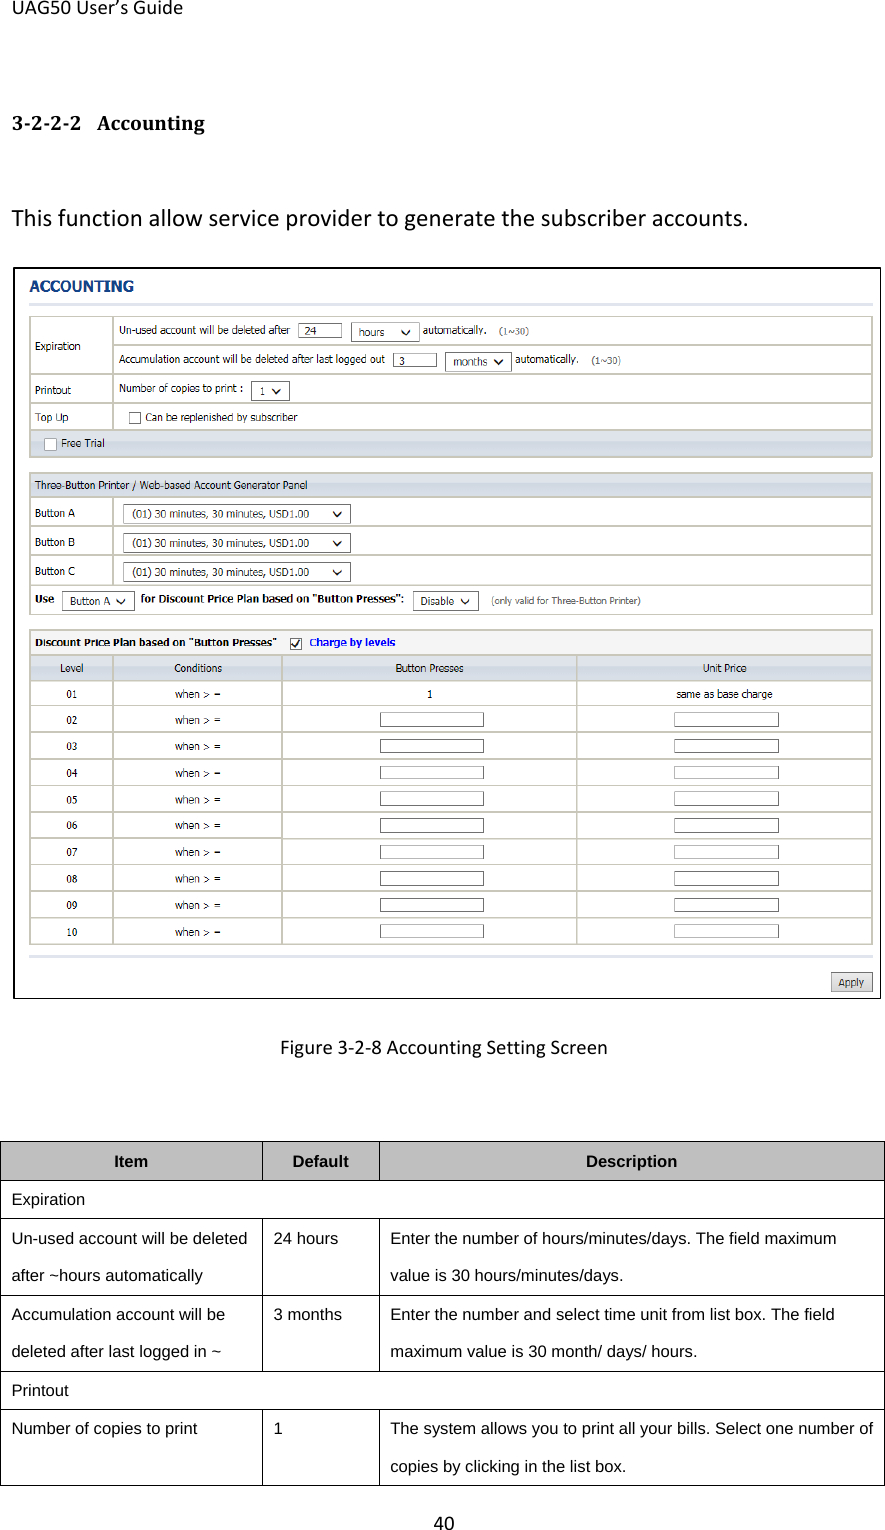 UAG50 User’s Guide 40 3-2-2-2  Accounting This function allow service provider to generate the subscriber accounts.  Figure 3-2-8 Accounting Setting Screen  Item Default Description Expiration Un-used account will be deleted after ~hours automatically 24 hours Enter the number of hours/minutes/days. The field maximum value is 30 hours/minutes/days. Accumulation account will be deleted after last logged in ~ 3 months Enter the number and select time unit from list box. The field maximum value is 30 month/ days/ hours. Printout Number of copies to print  1  The system allows you to print all your bills. Select one number of copies by clicking in the list box. 